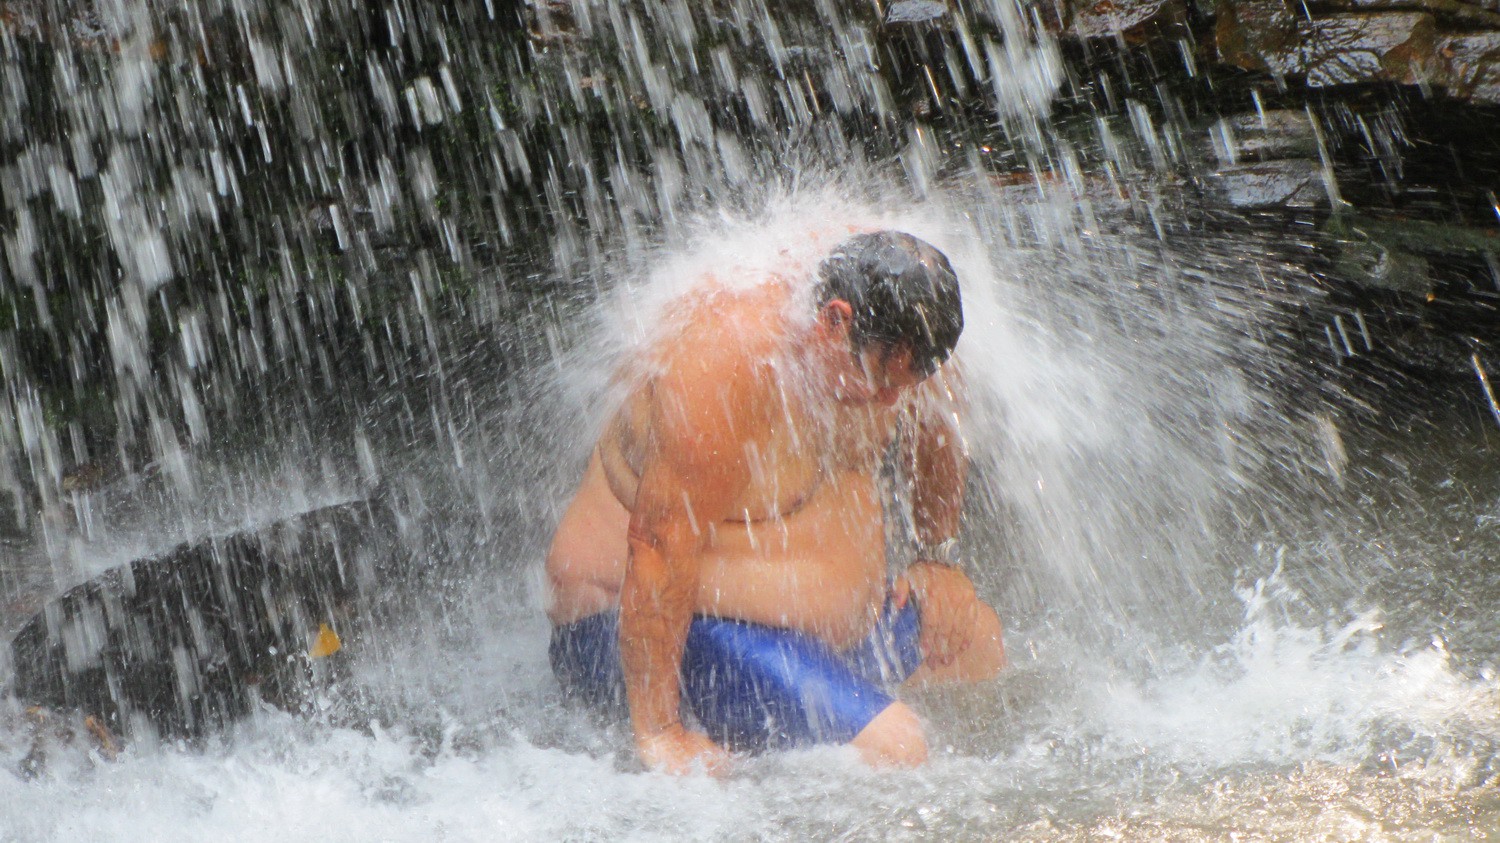 Enjoying the cold water of the Cachoeira Bonsucesso on a hot Saturday